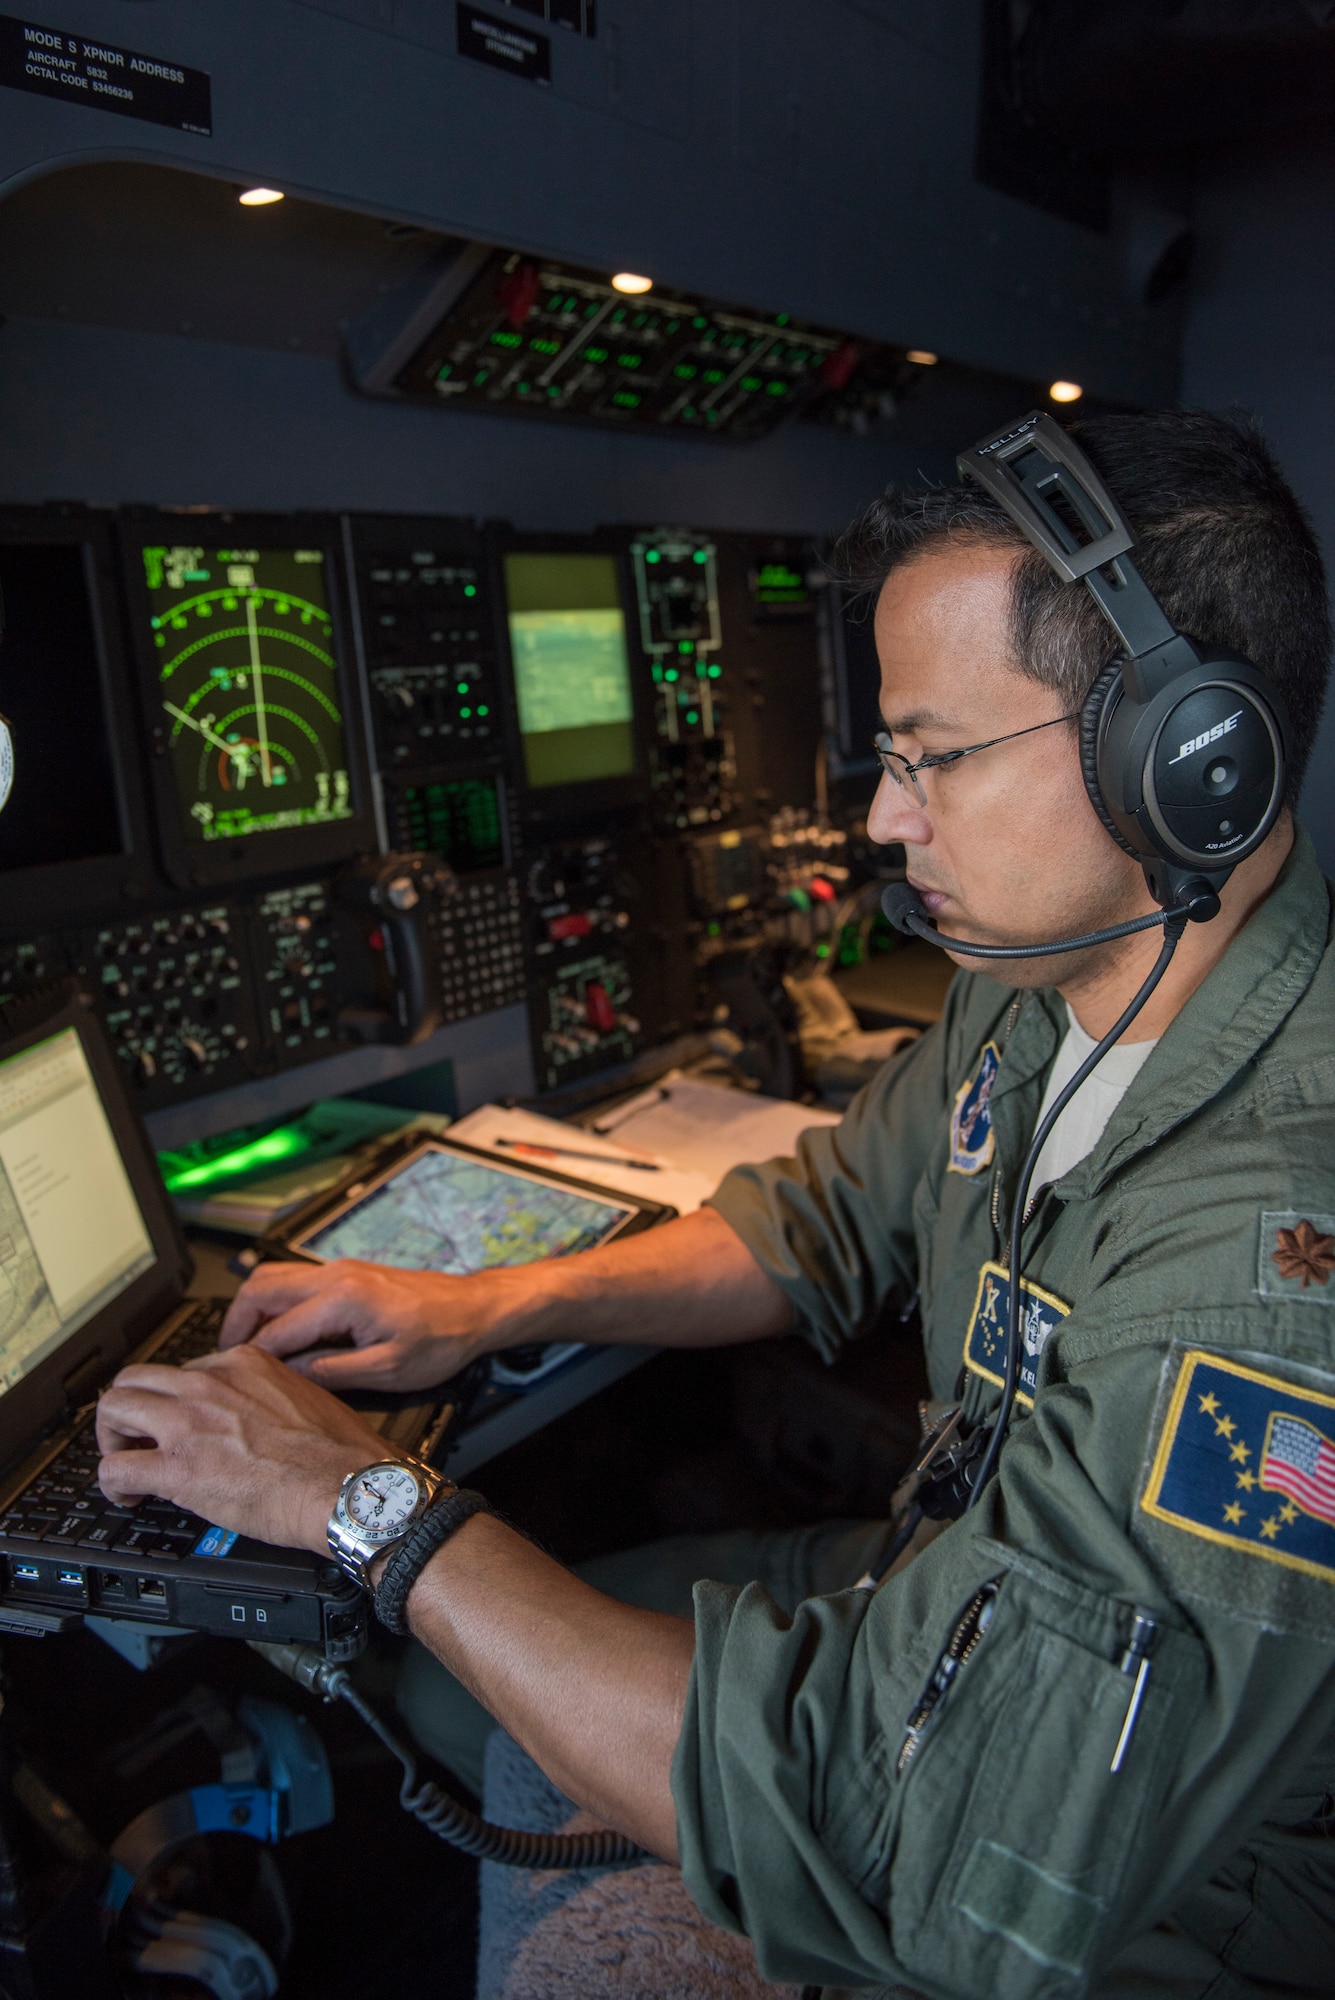 Maj. Daniel Kelley, a combat systems operator with the 211th Rescue Sqaudron, communicates vital data to the pilots during an aerial damage assessment Nov. 30, 2018, on a C-130J "Combat King II". In a matter of hours, members of the Alaska Air National Guard's Maintenance and Operation groups turned a planned community engagement into an aerial survey of earthquake damage in Southcentral Alaska, reporting findings to the State of Alaska's Joint Operations Center.